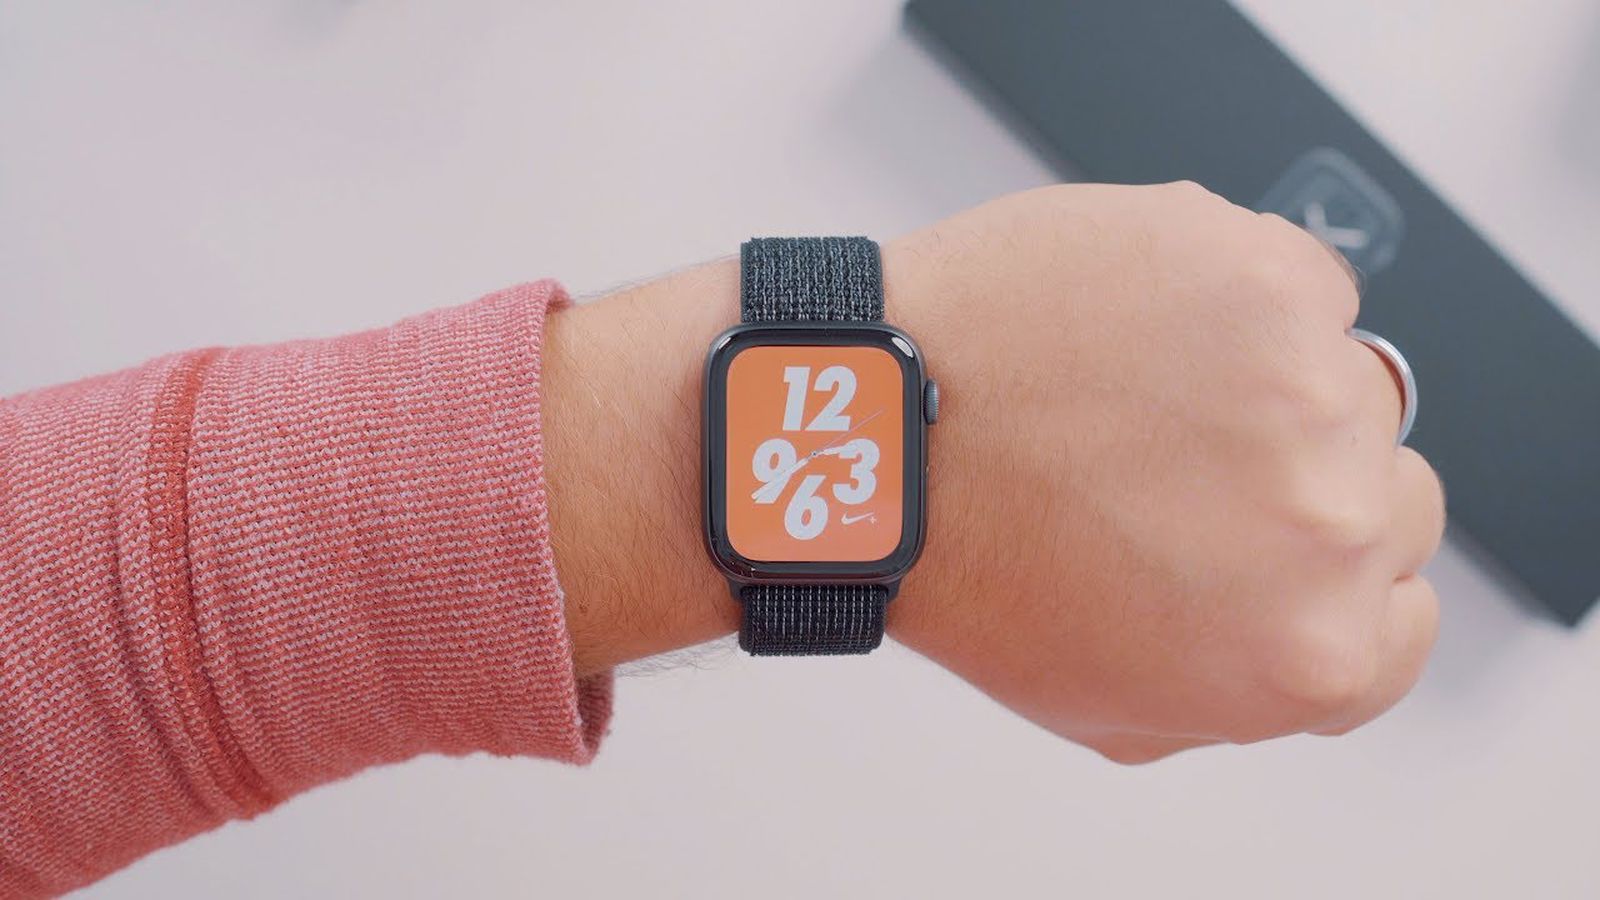 Hands-On With the New Nike+ Apple Watch Series 4 - MacRumors